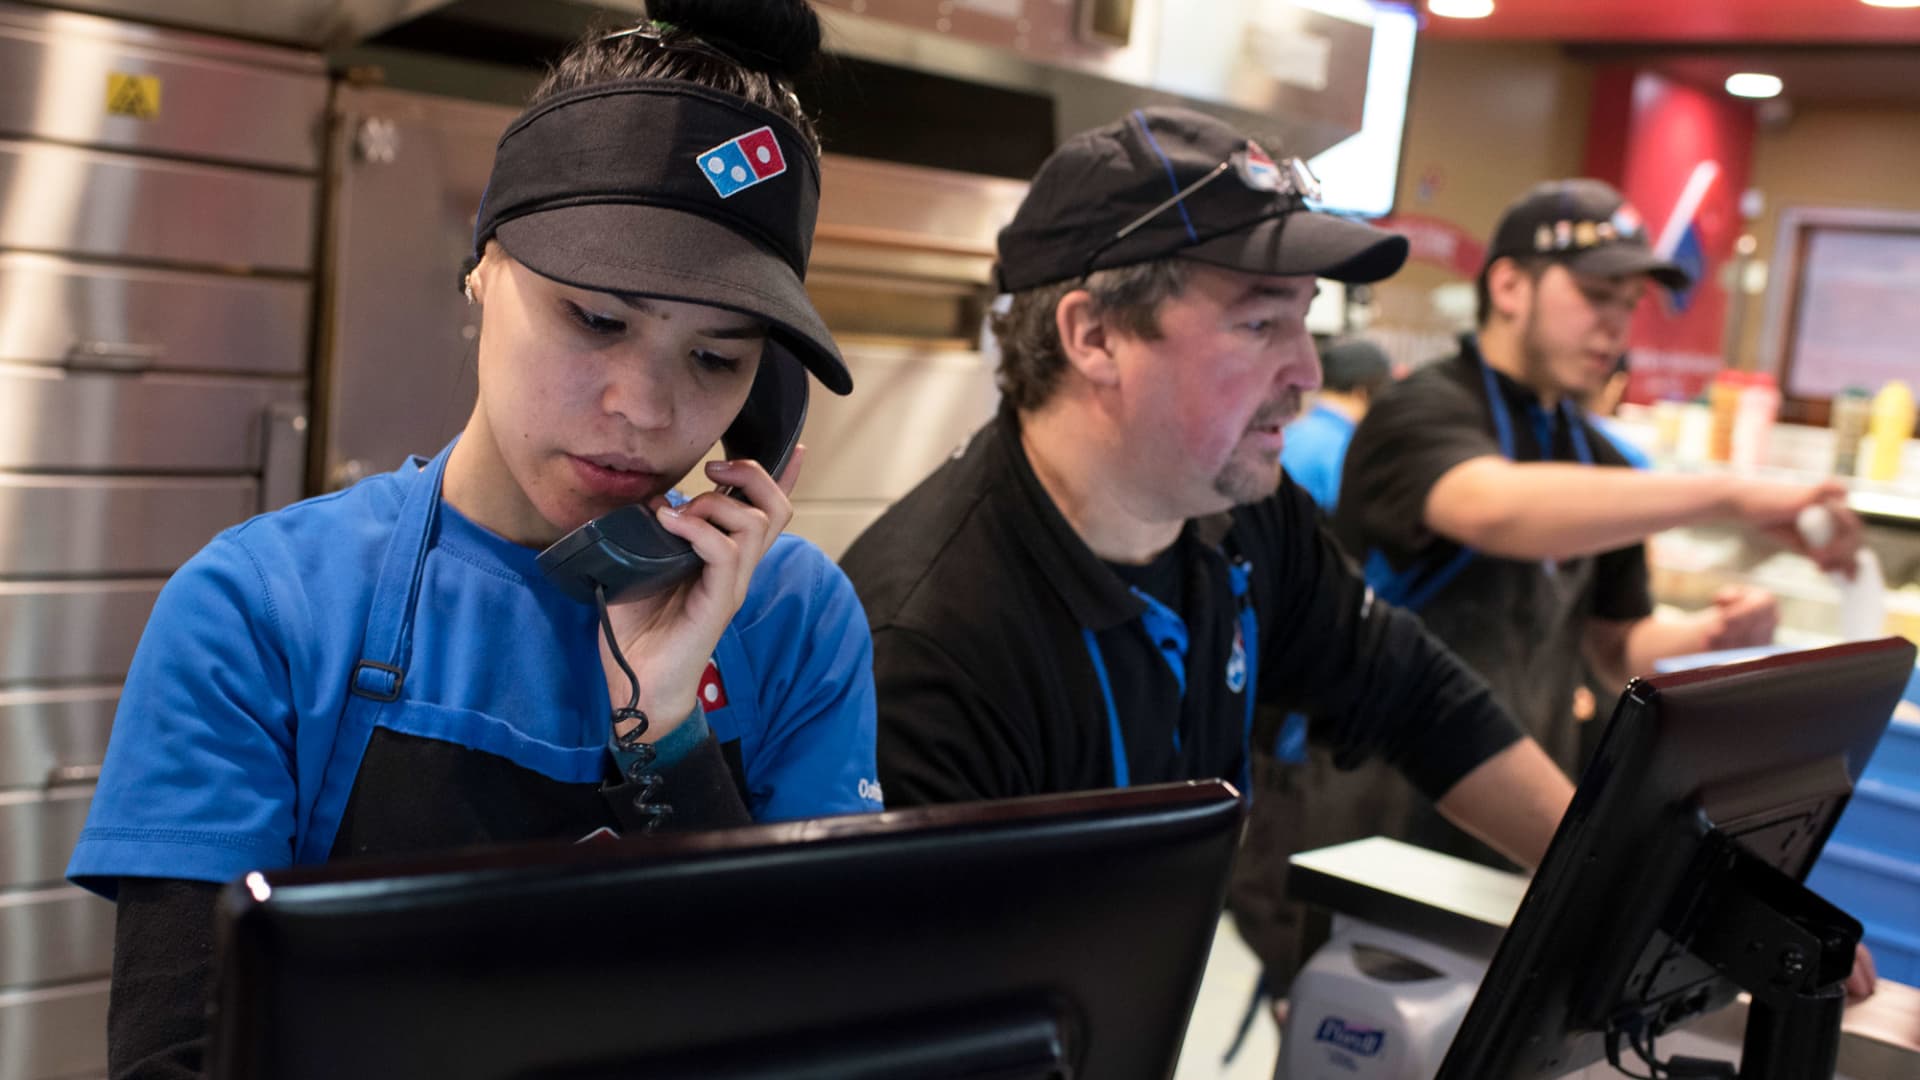 An employee takes an order on the phone at a Domino's Pizza in Jersey City, New Jersey.